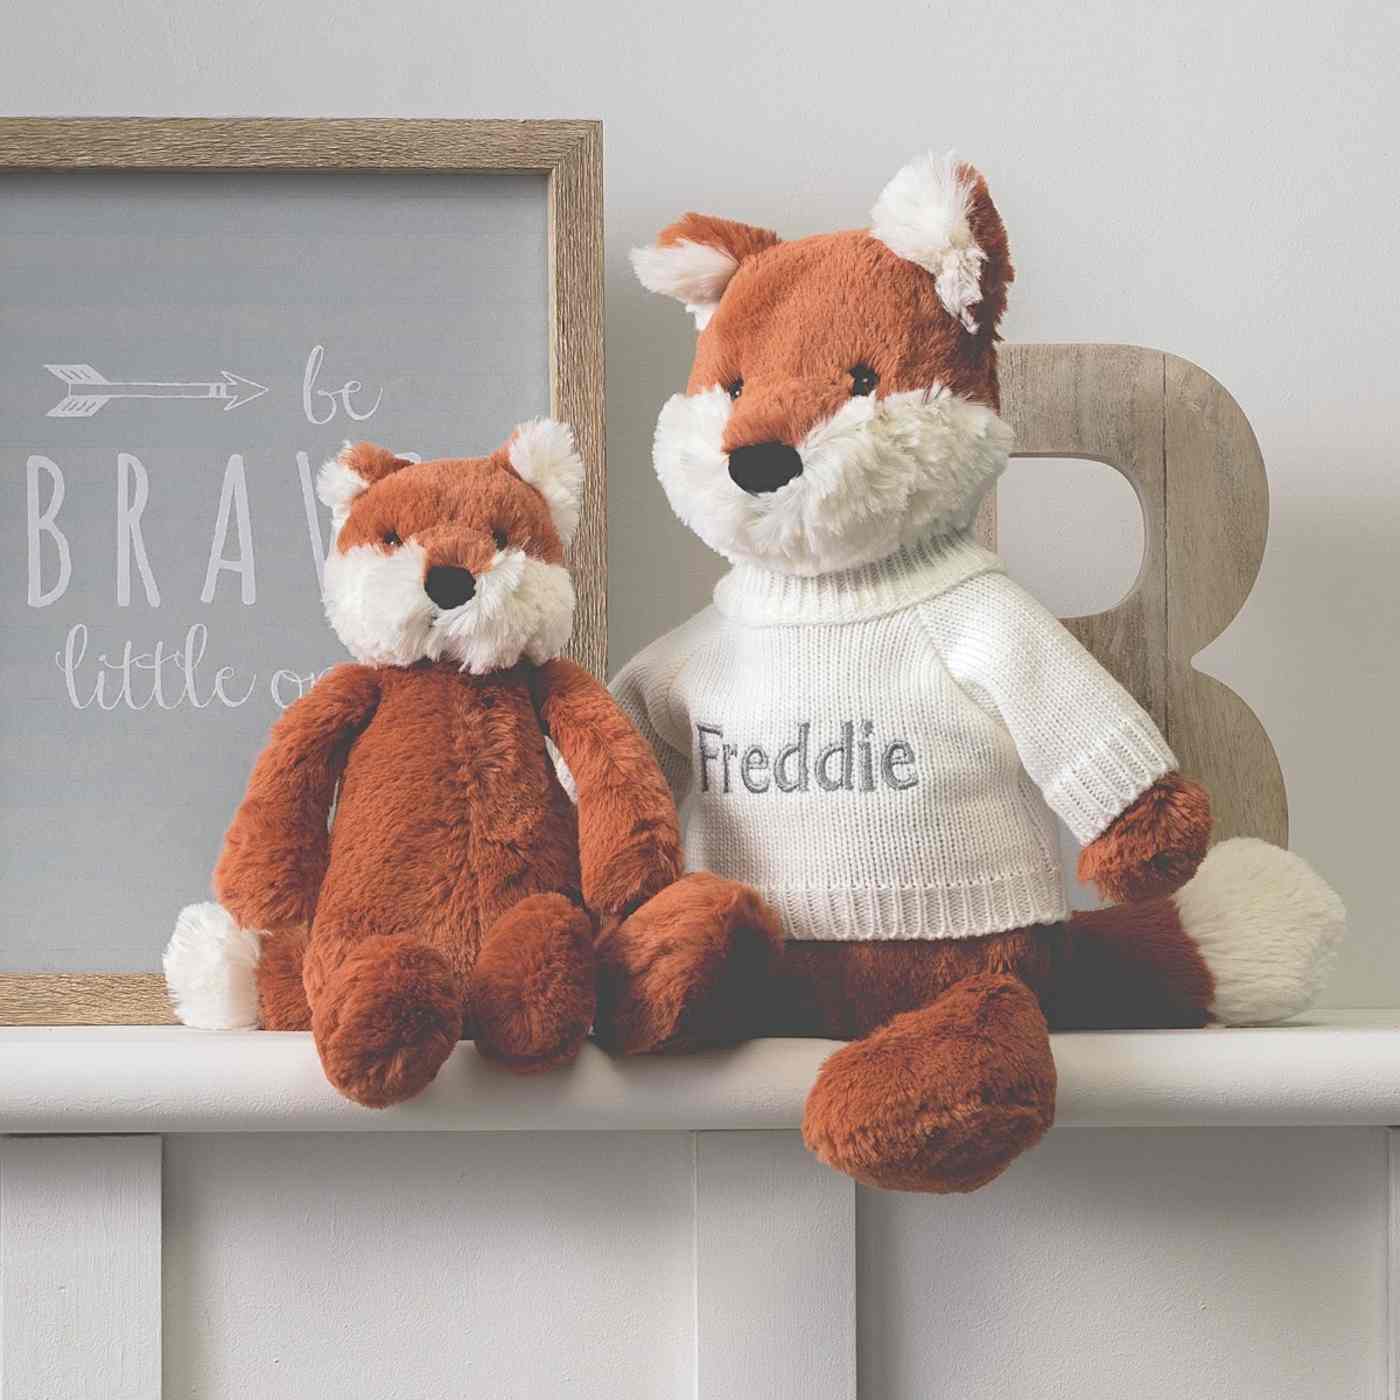 Gift for the 1st birthday with a delicious plush animal and embroidered names